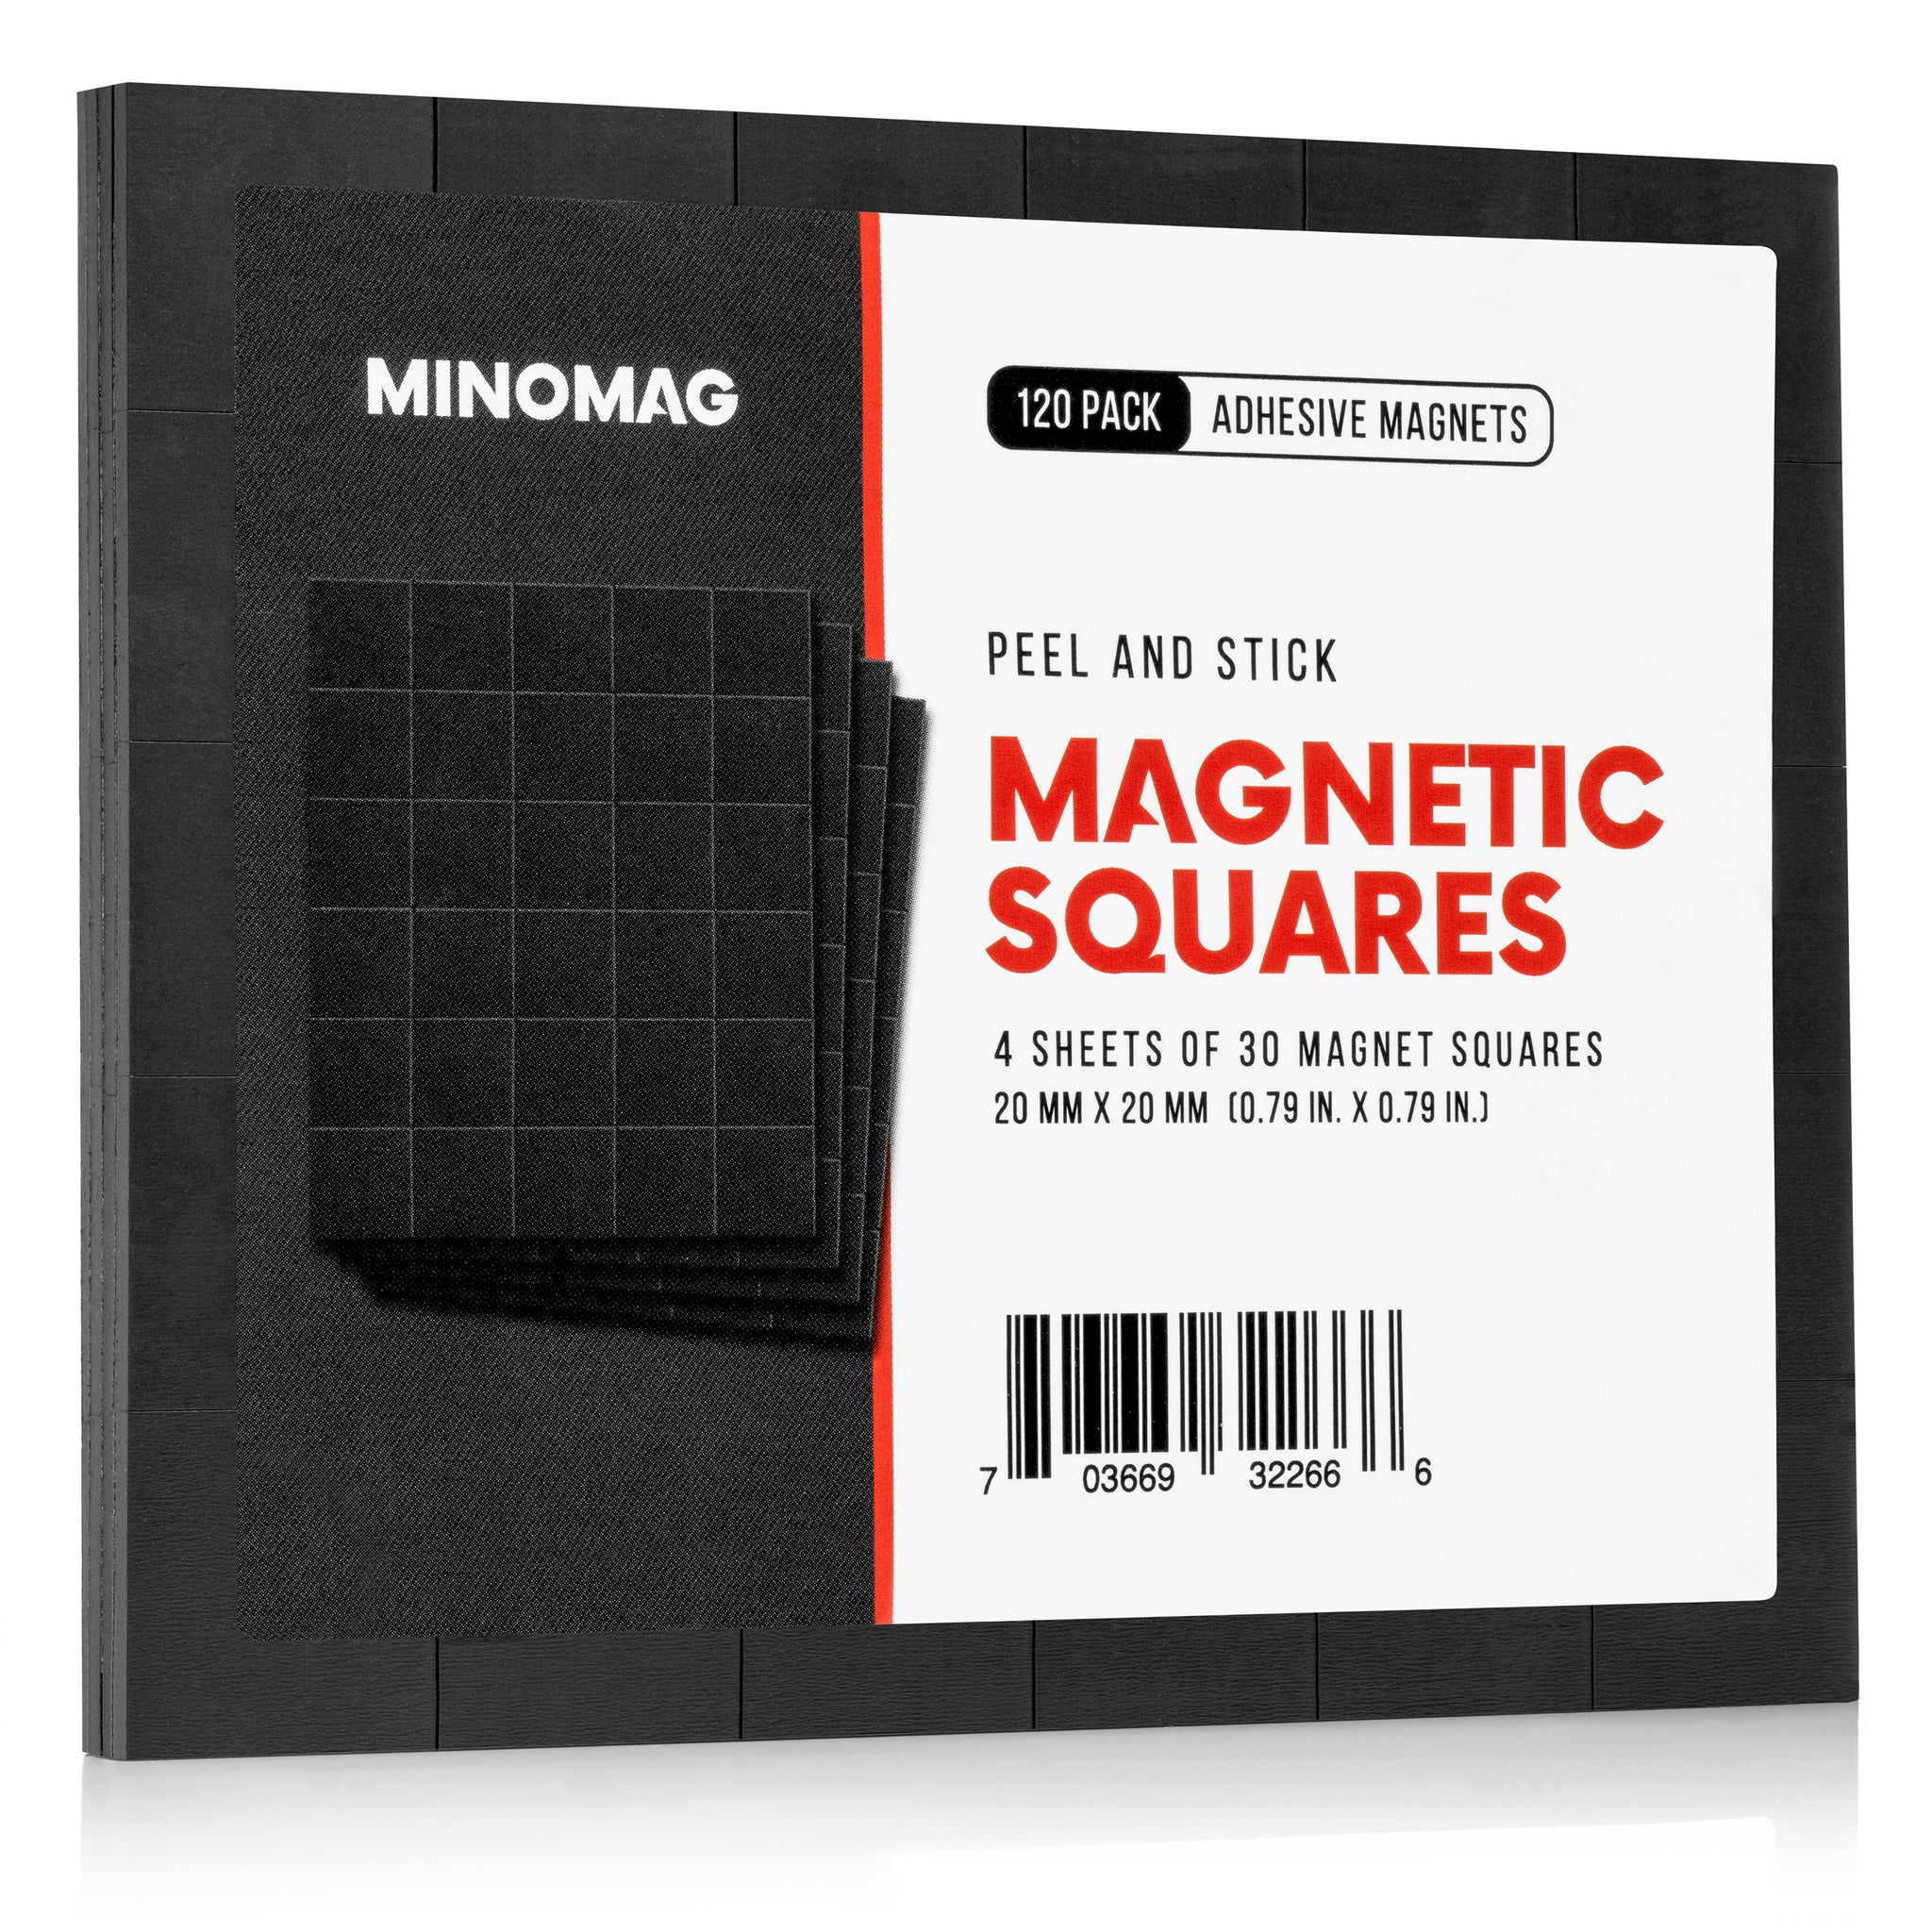 Magnetic Squares, Small Sticky Magnets with Adhesive Backing, Self-Adhesive Fl